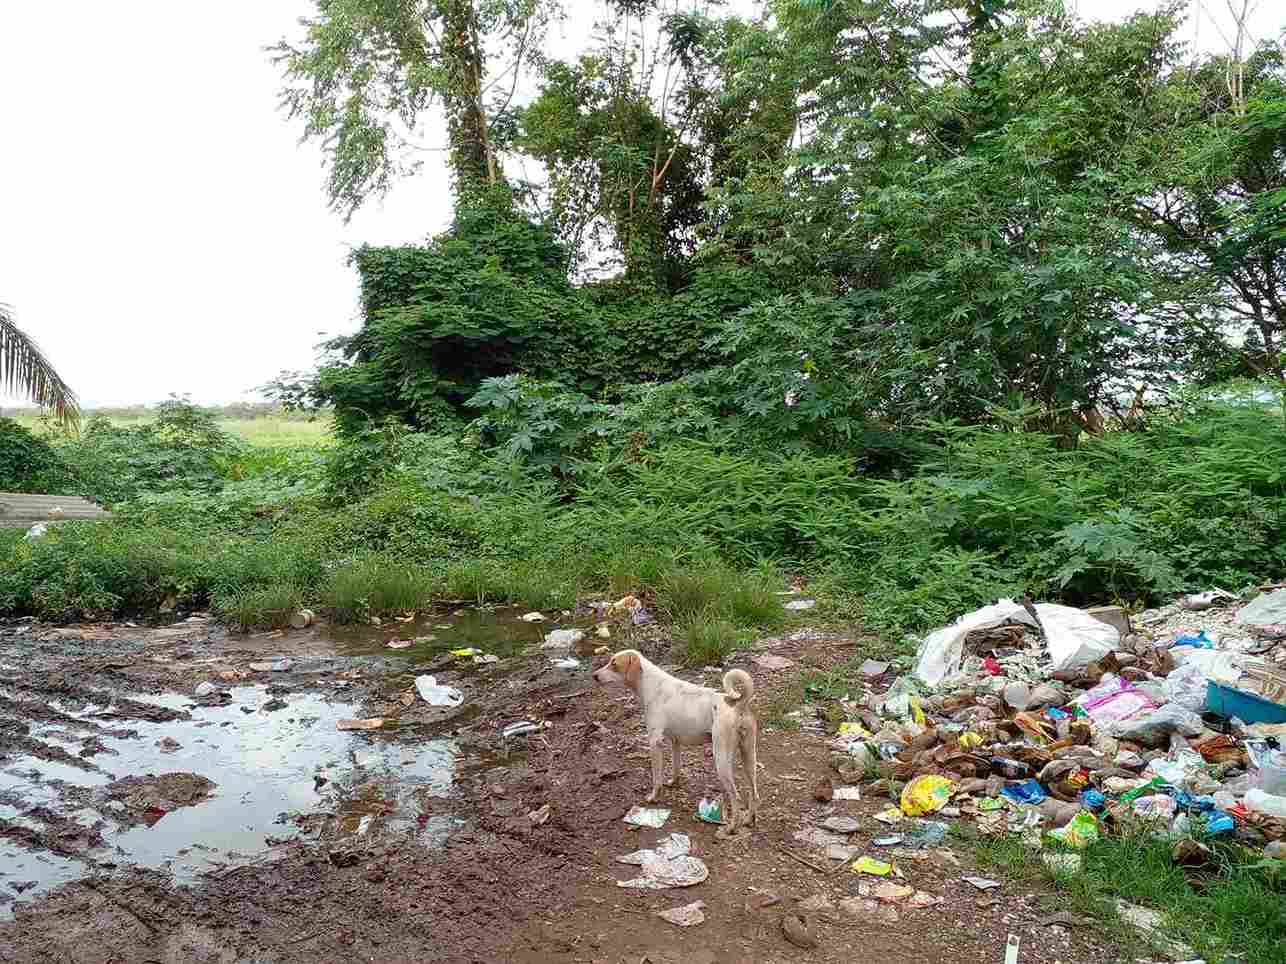 Goa's plastic waste garbage is commonly seen in open spaces across the beautiful state.